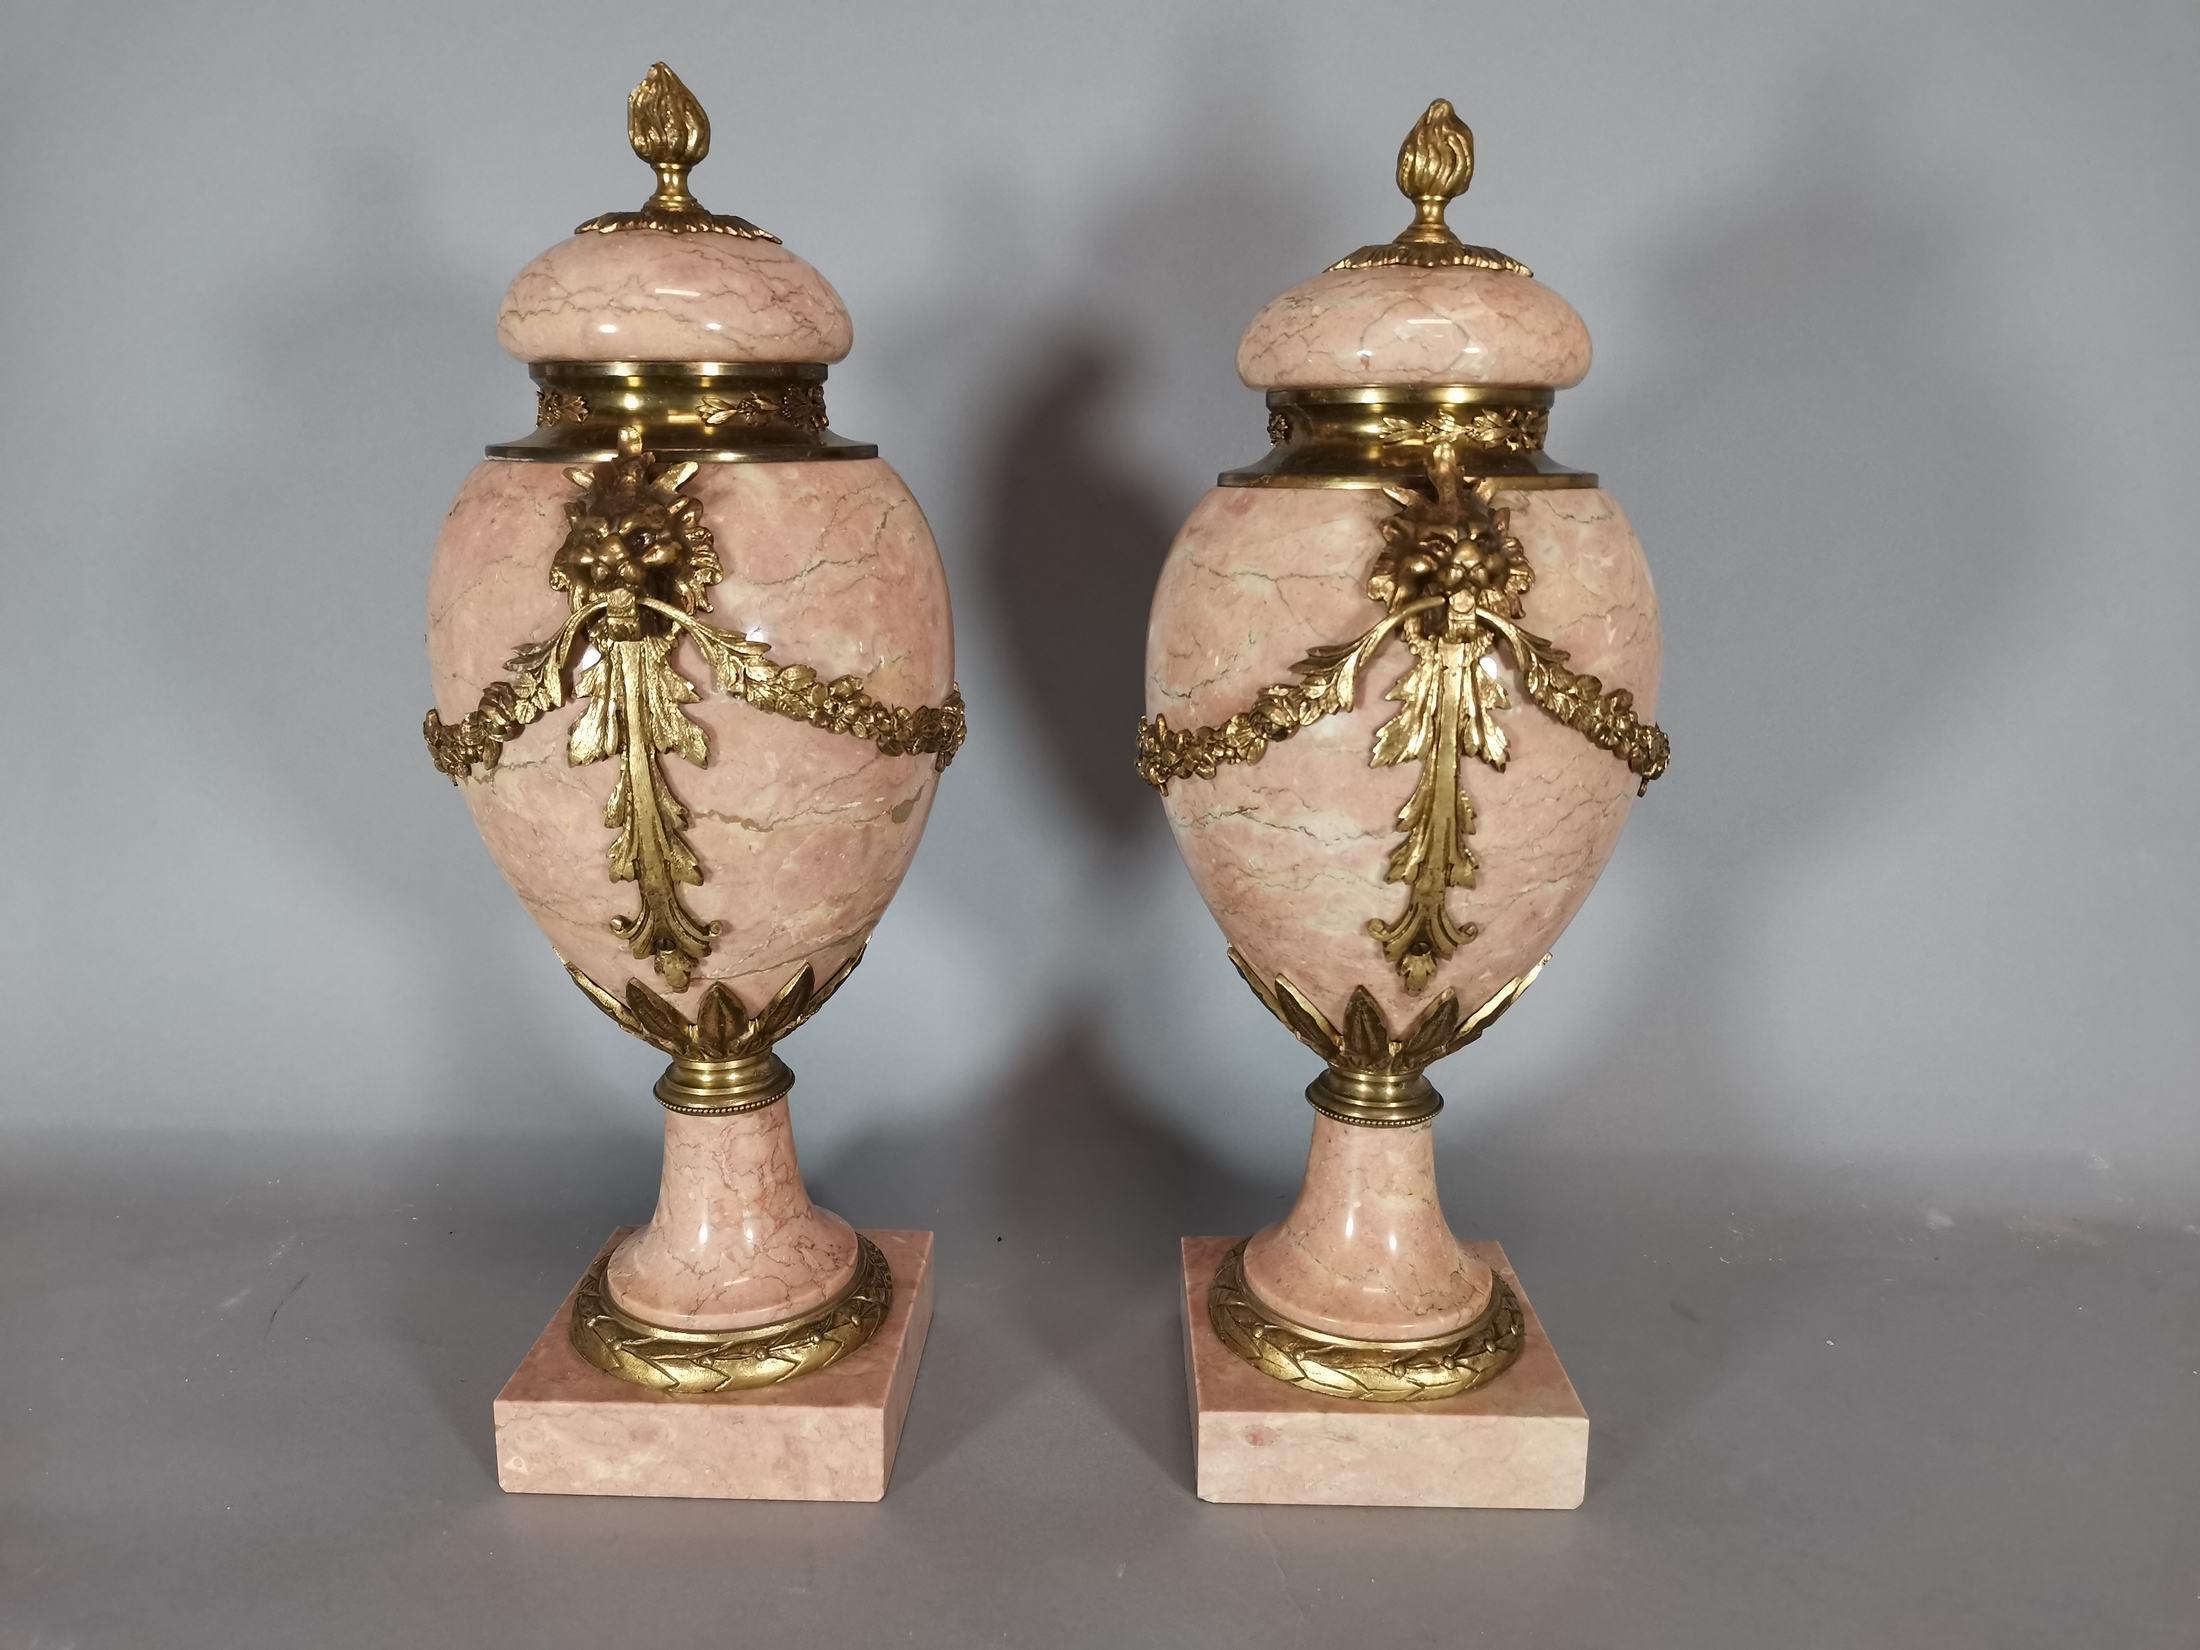 Modern Pair of Marble and Gild Bronze Vase from the Early 1900, 20th Century For Sale